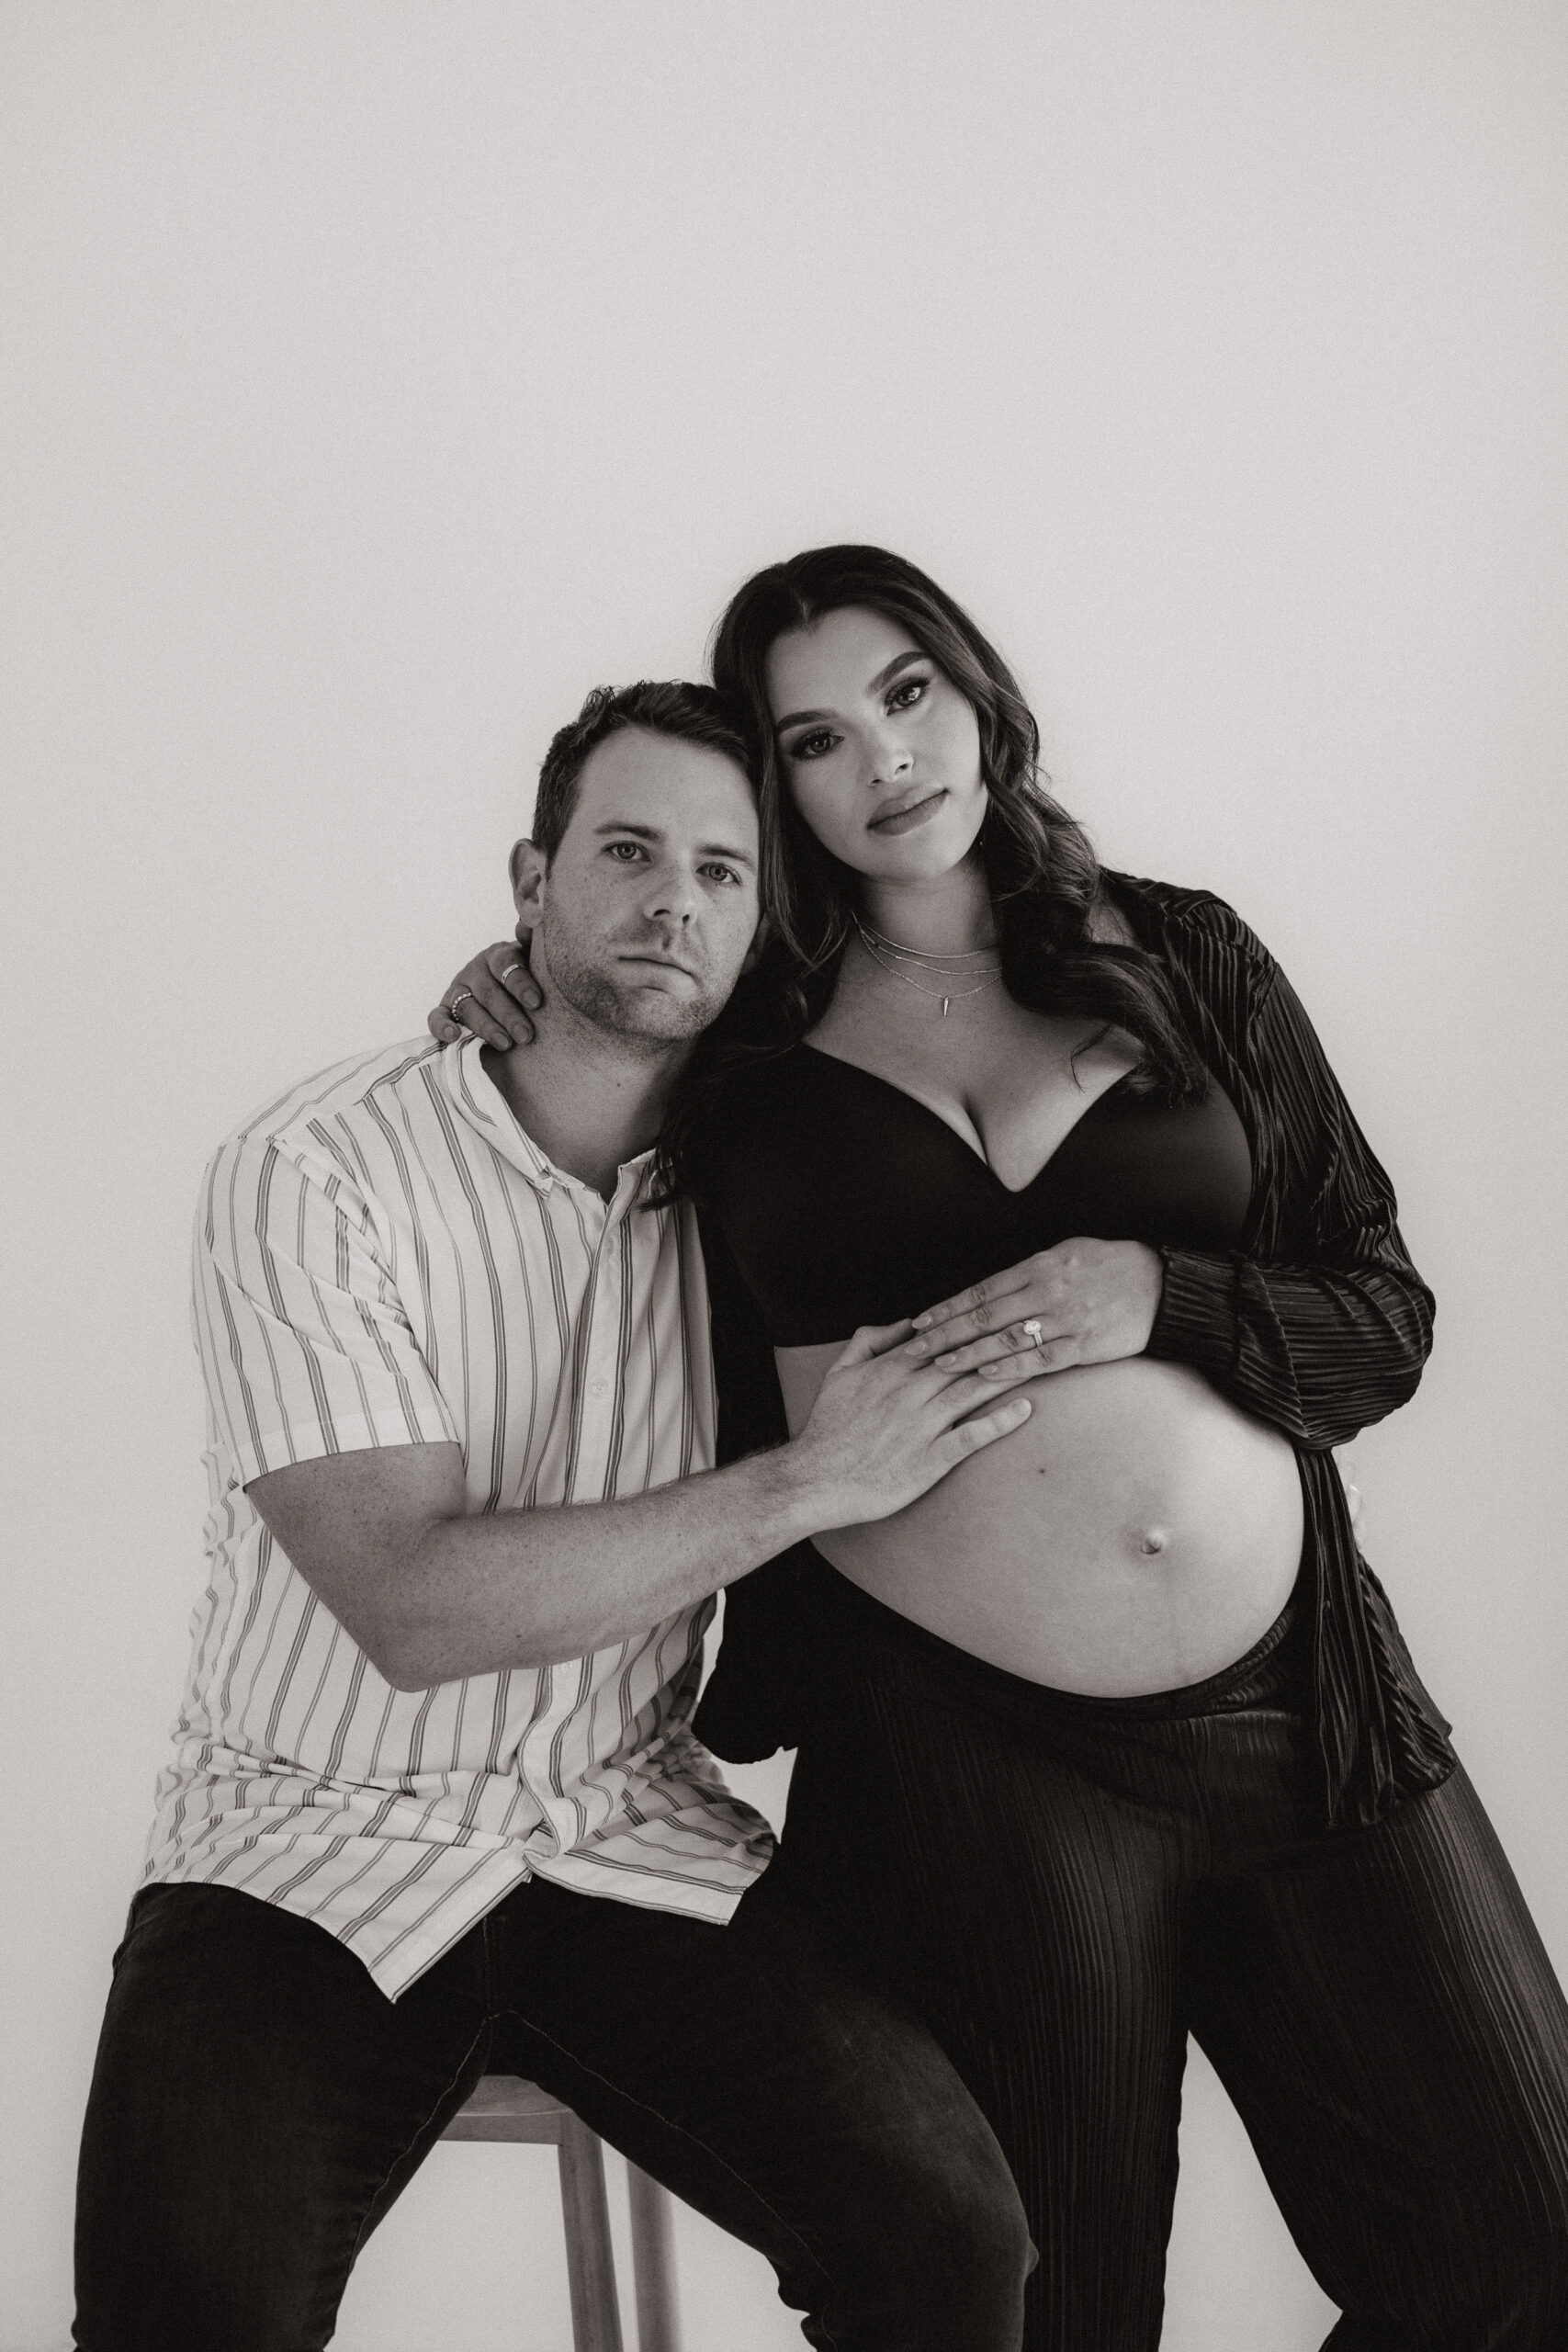 parent to be's looking at the camera with a serious face during their editorial maternity photoshoot